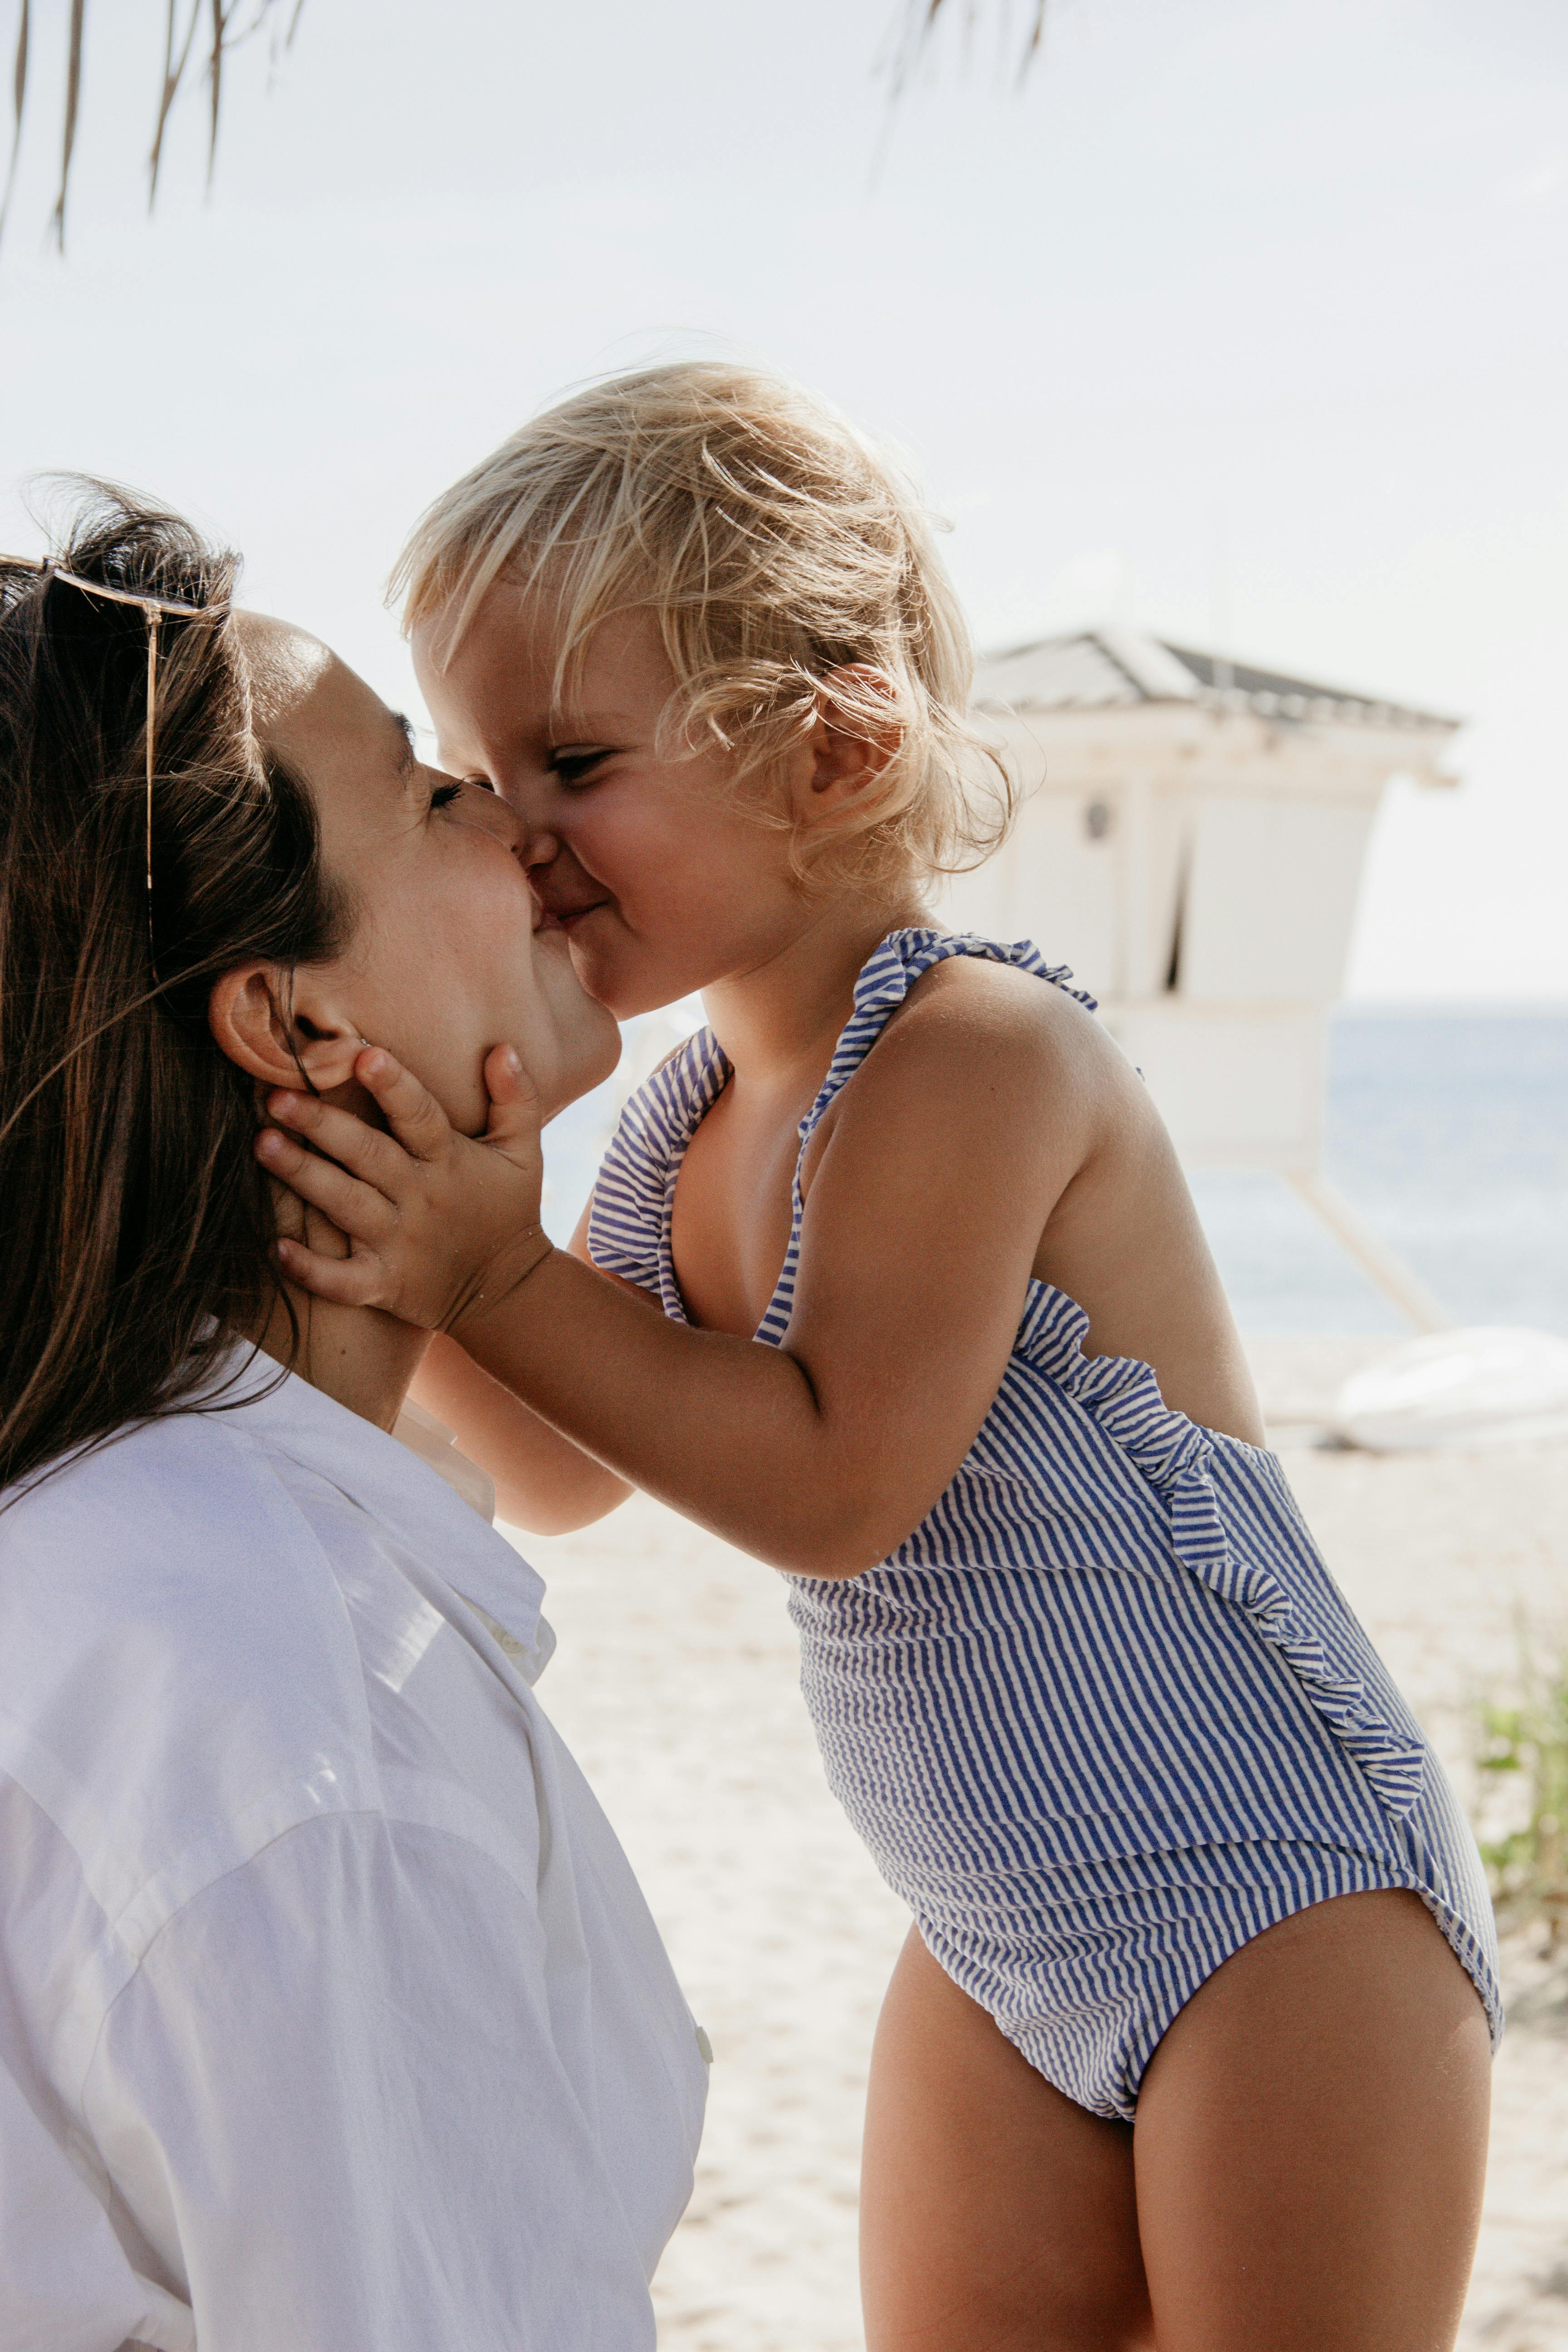 A dark-haired mom and her blonde child | Source: Pexels